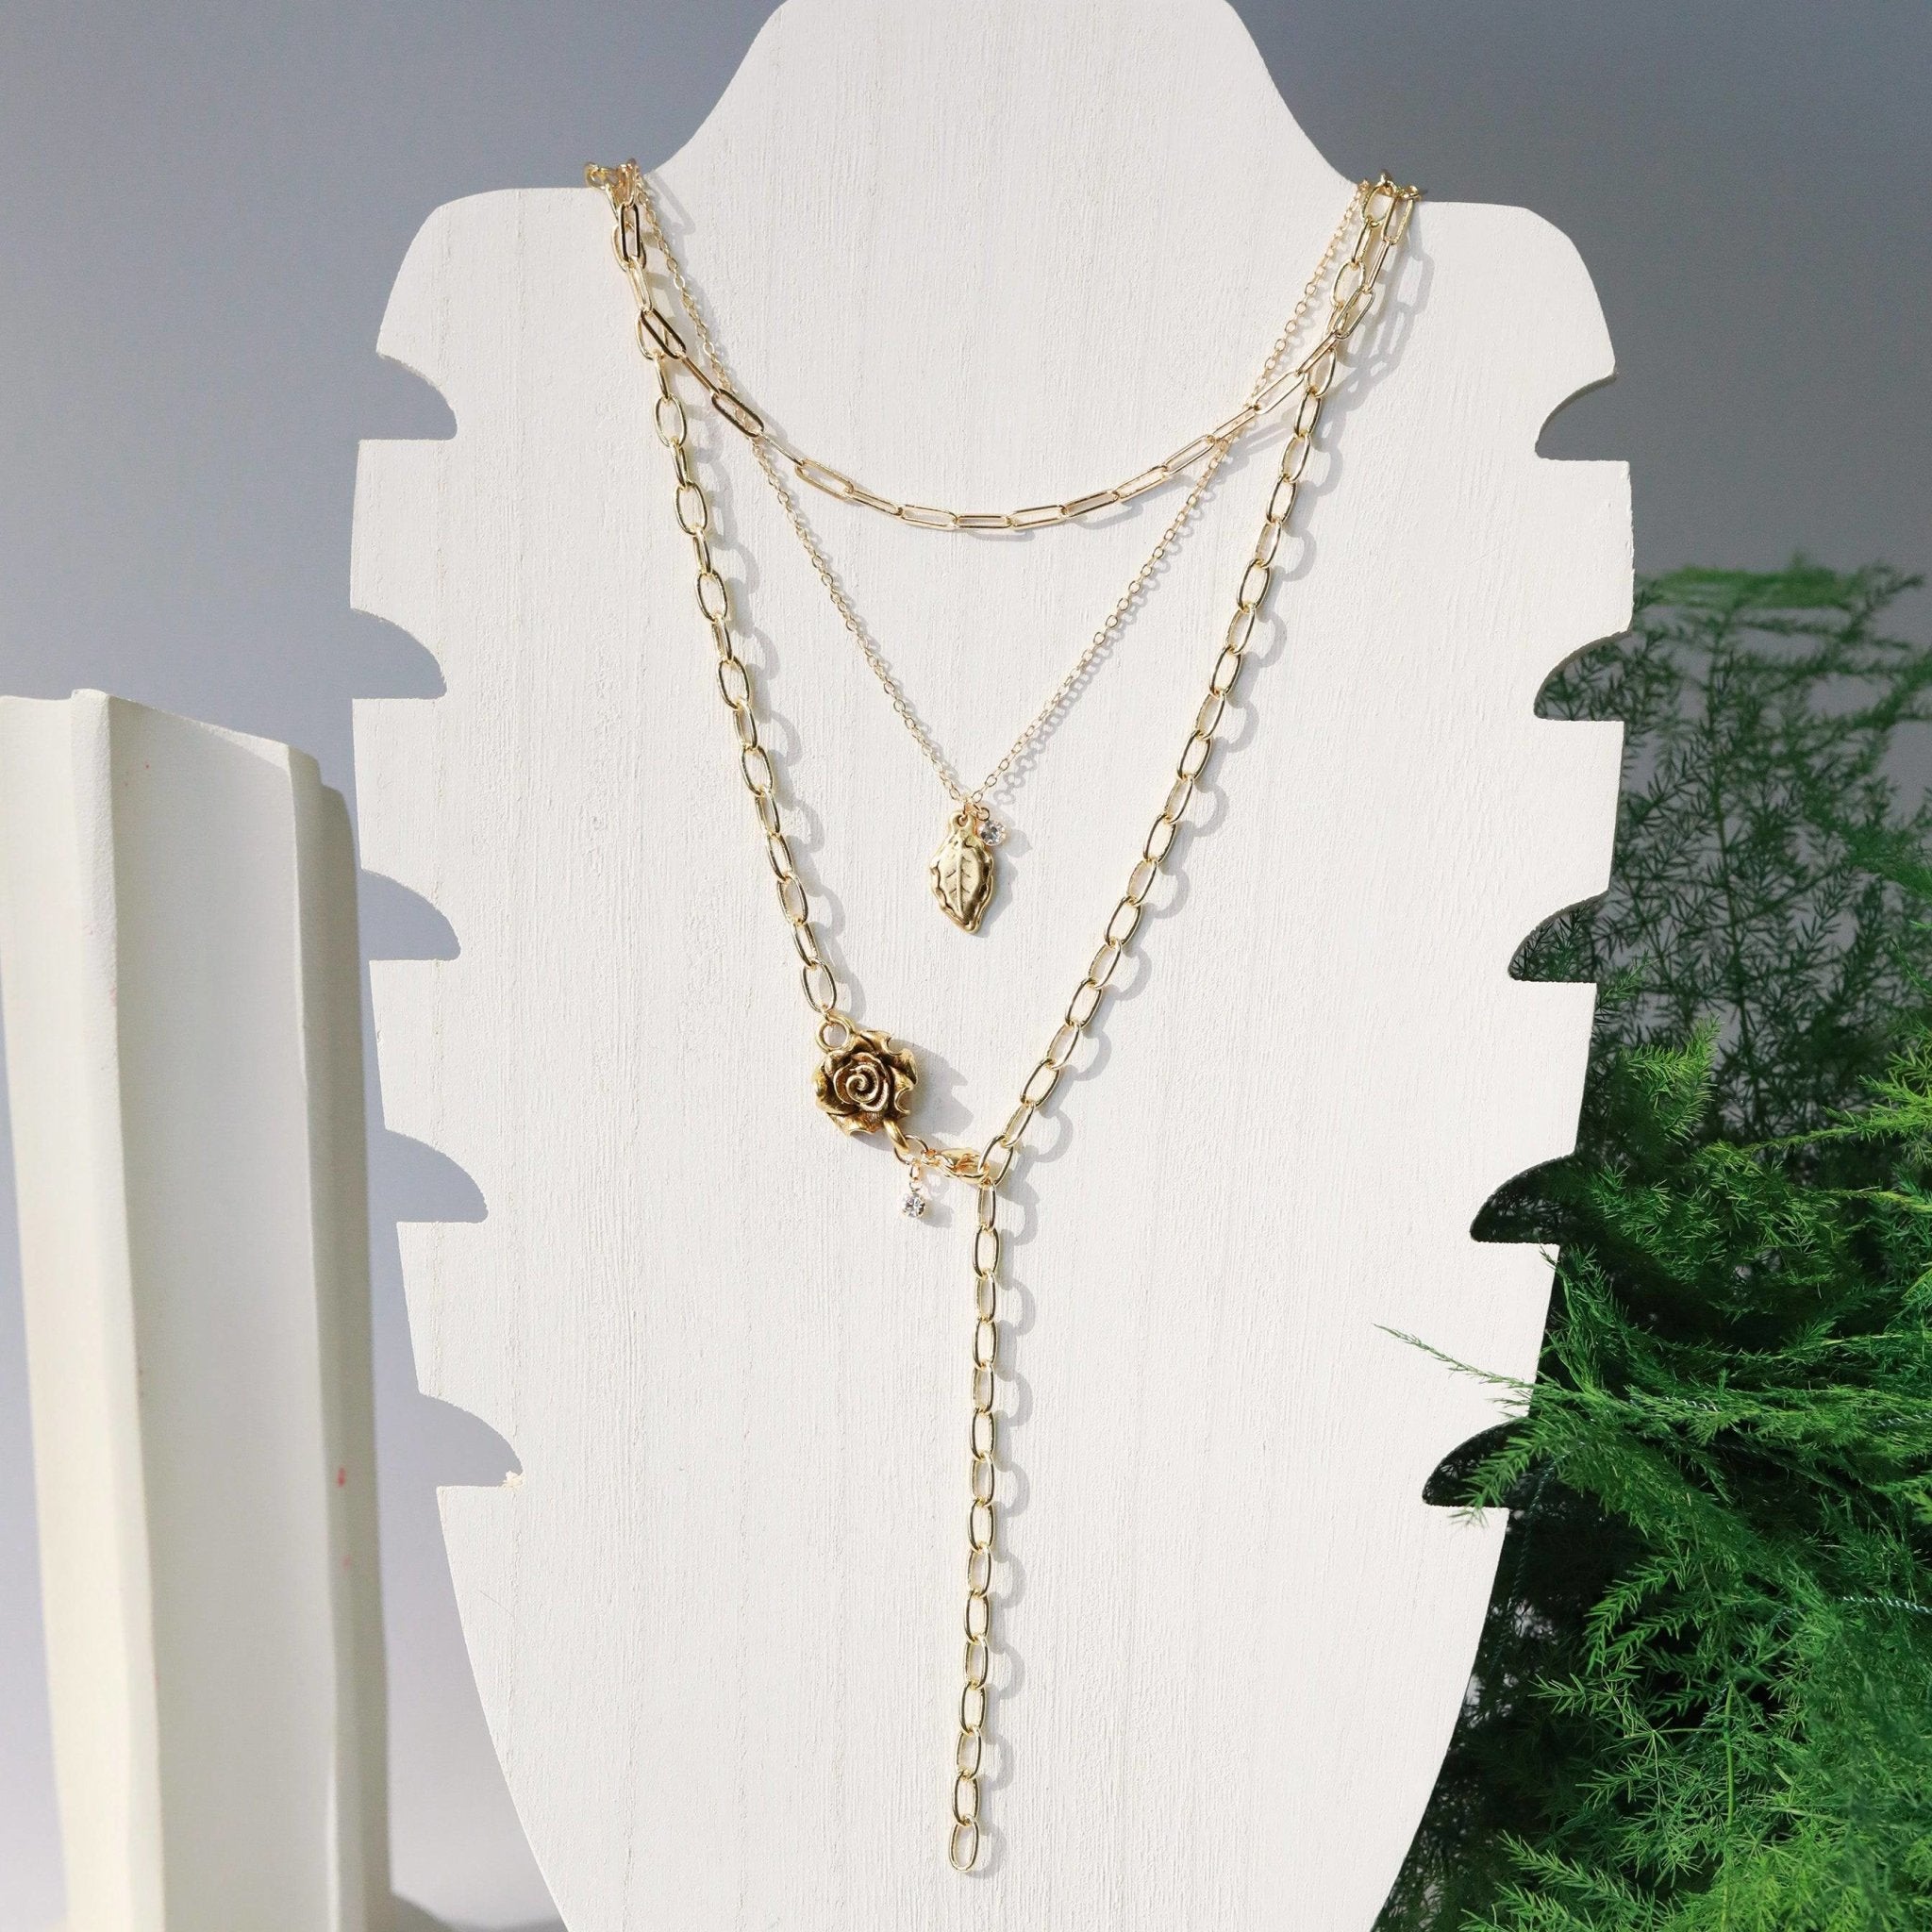 Golden Rose Lariat Necklace - The Gilded Witch